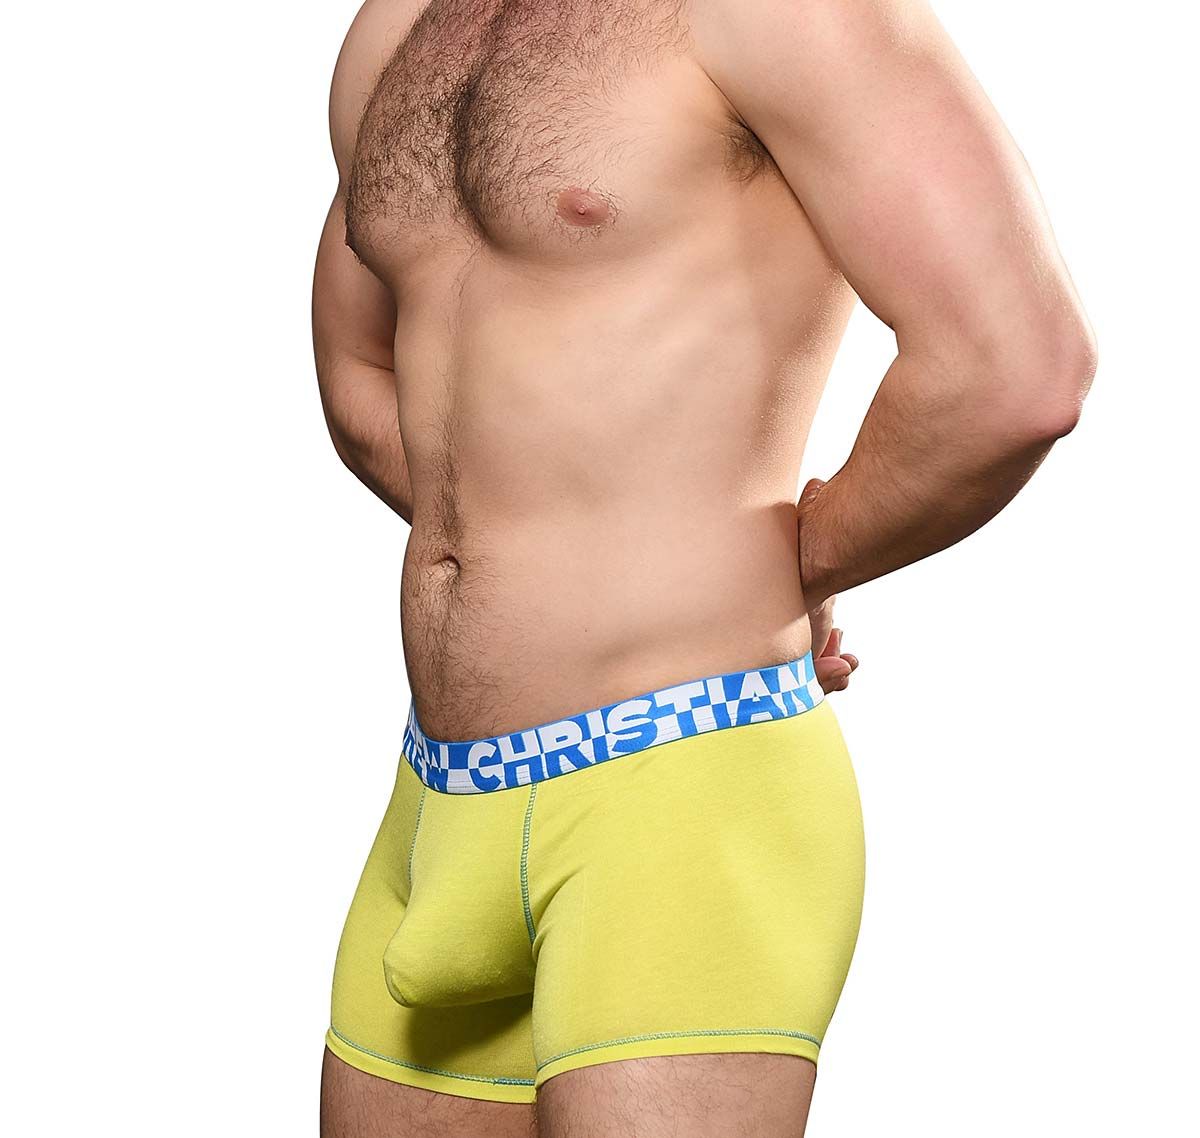 Andrew Christian Boxershorts ALMOST NAKED HANG-FREE BOXER 93019, gelb